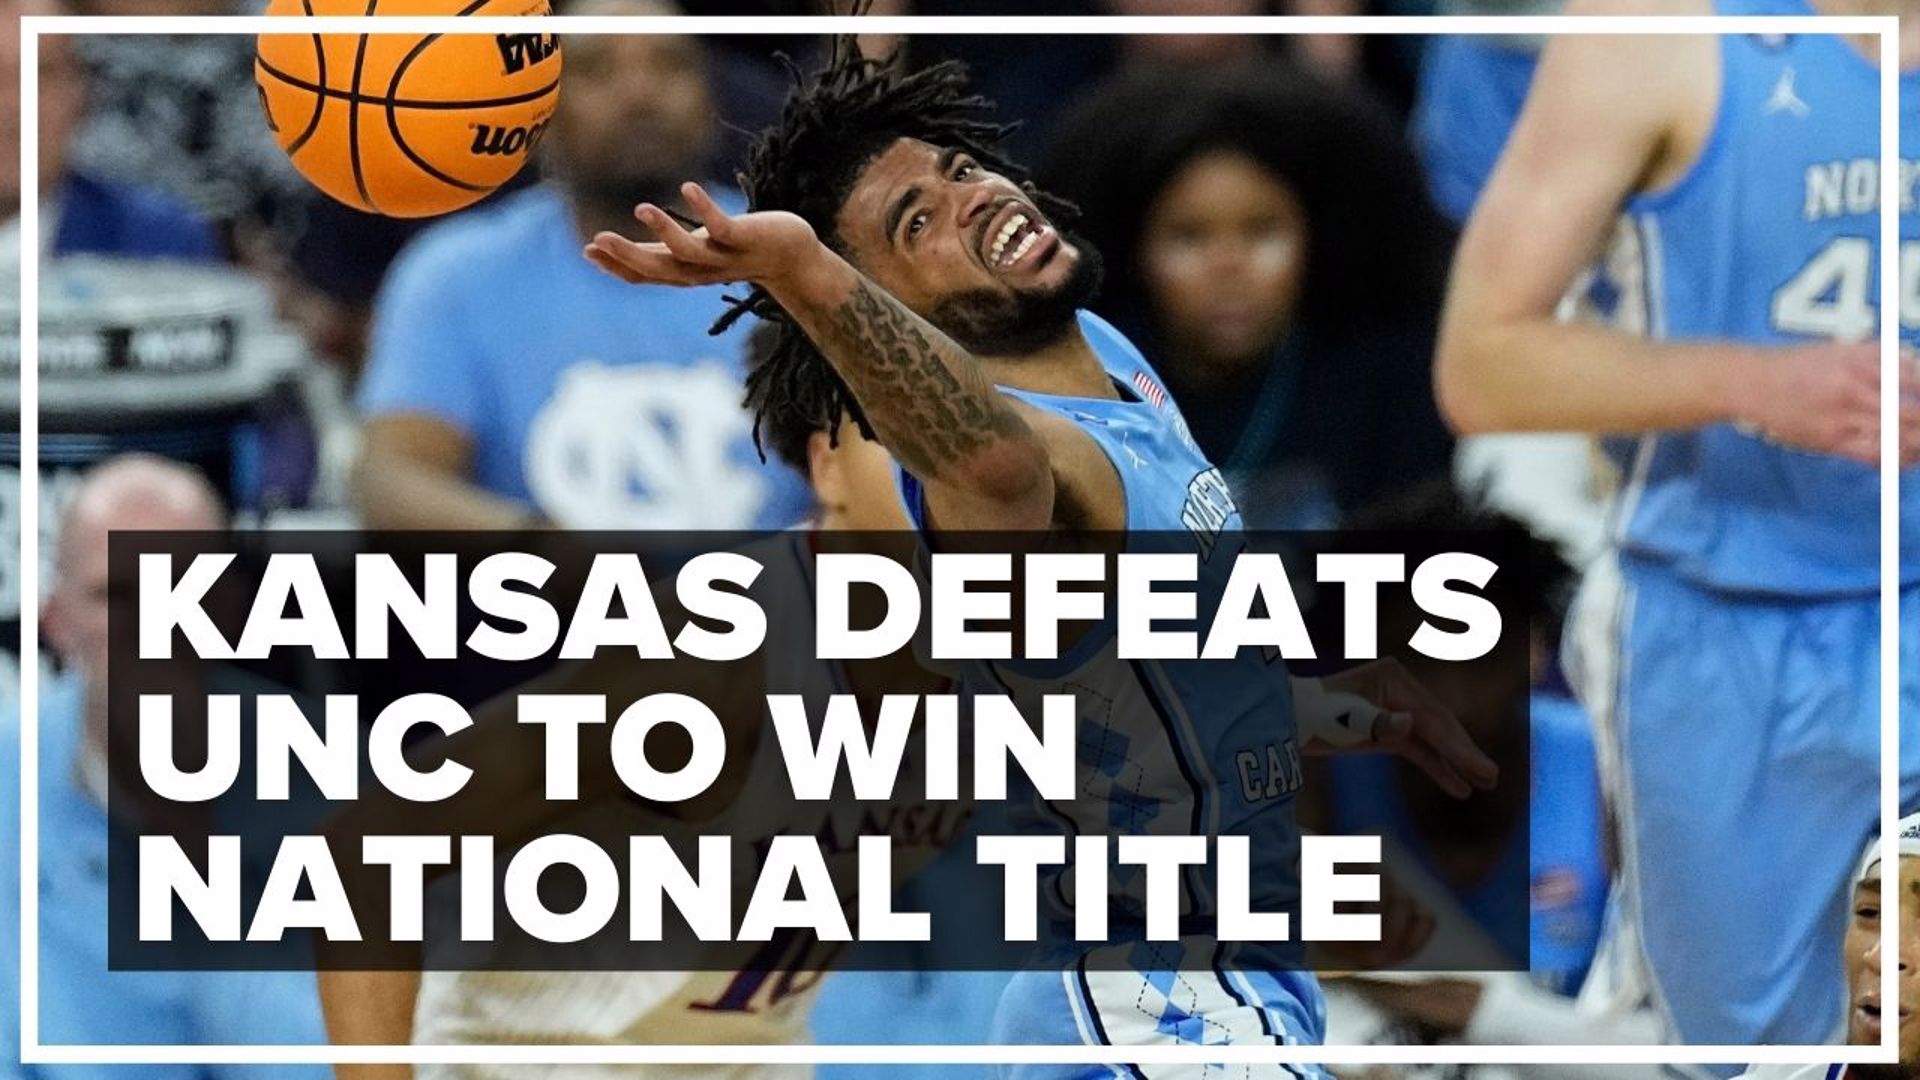 Kansas rallied to beat North Carolina for its fourth national championship in a thrilling March Madness finale. Here's how Tar Heels fans are reacting to the loss.